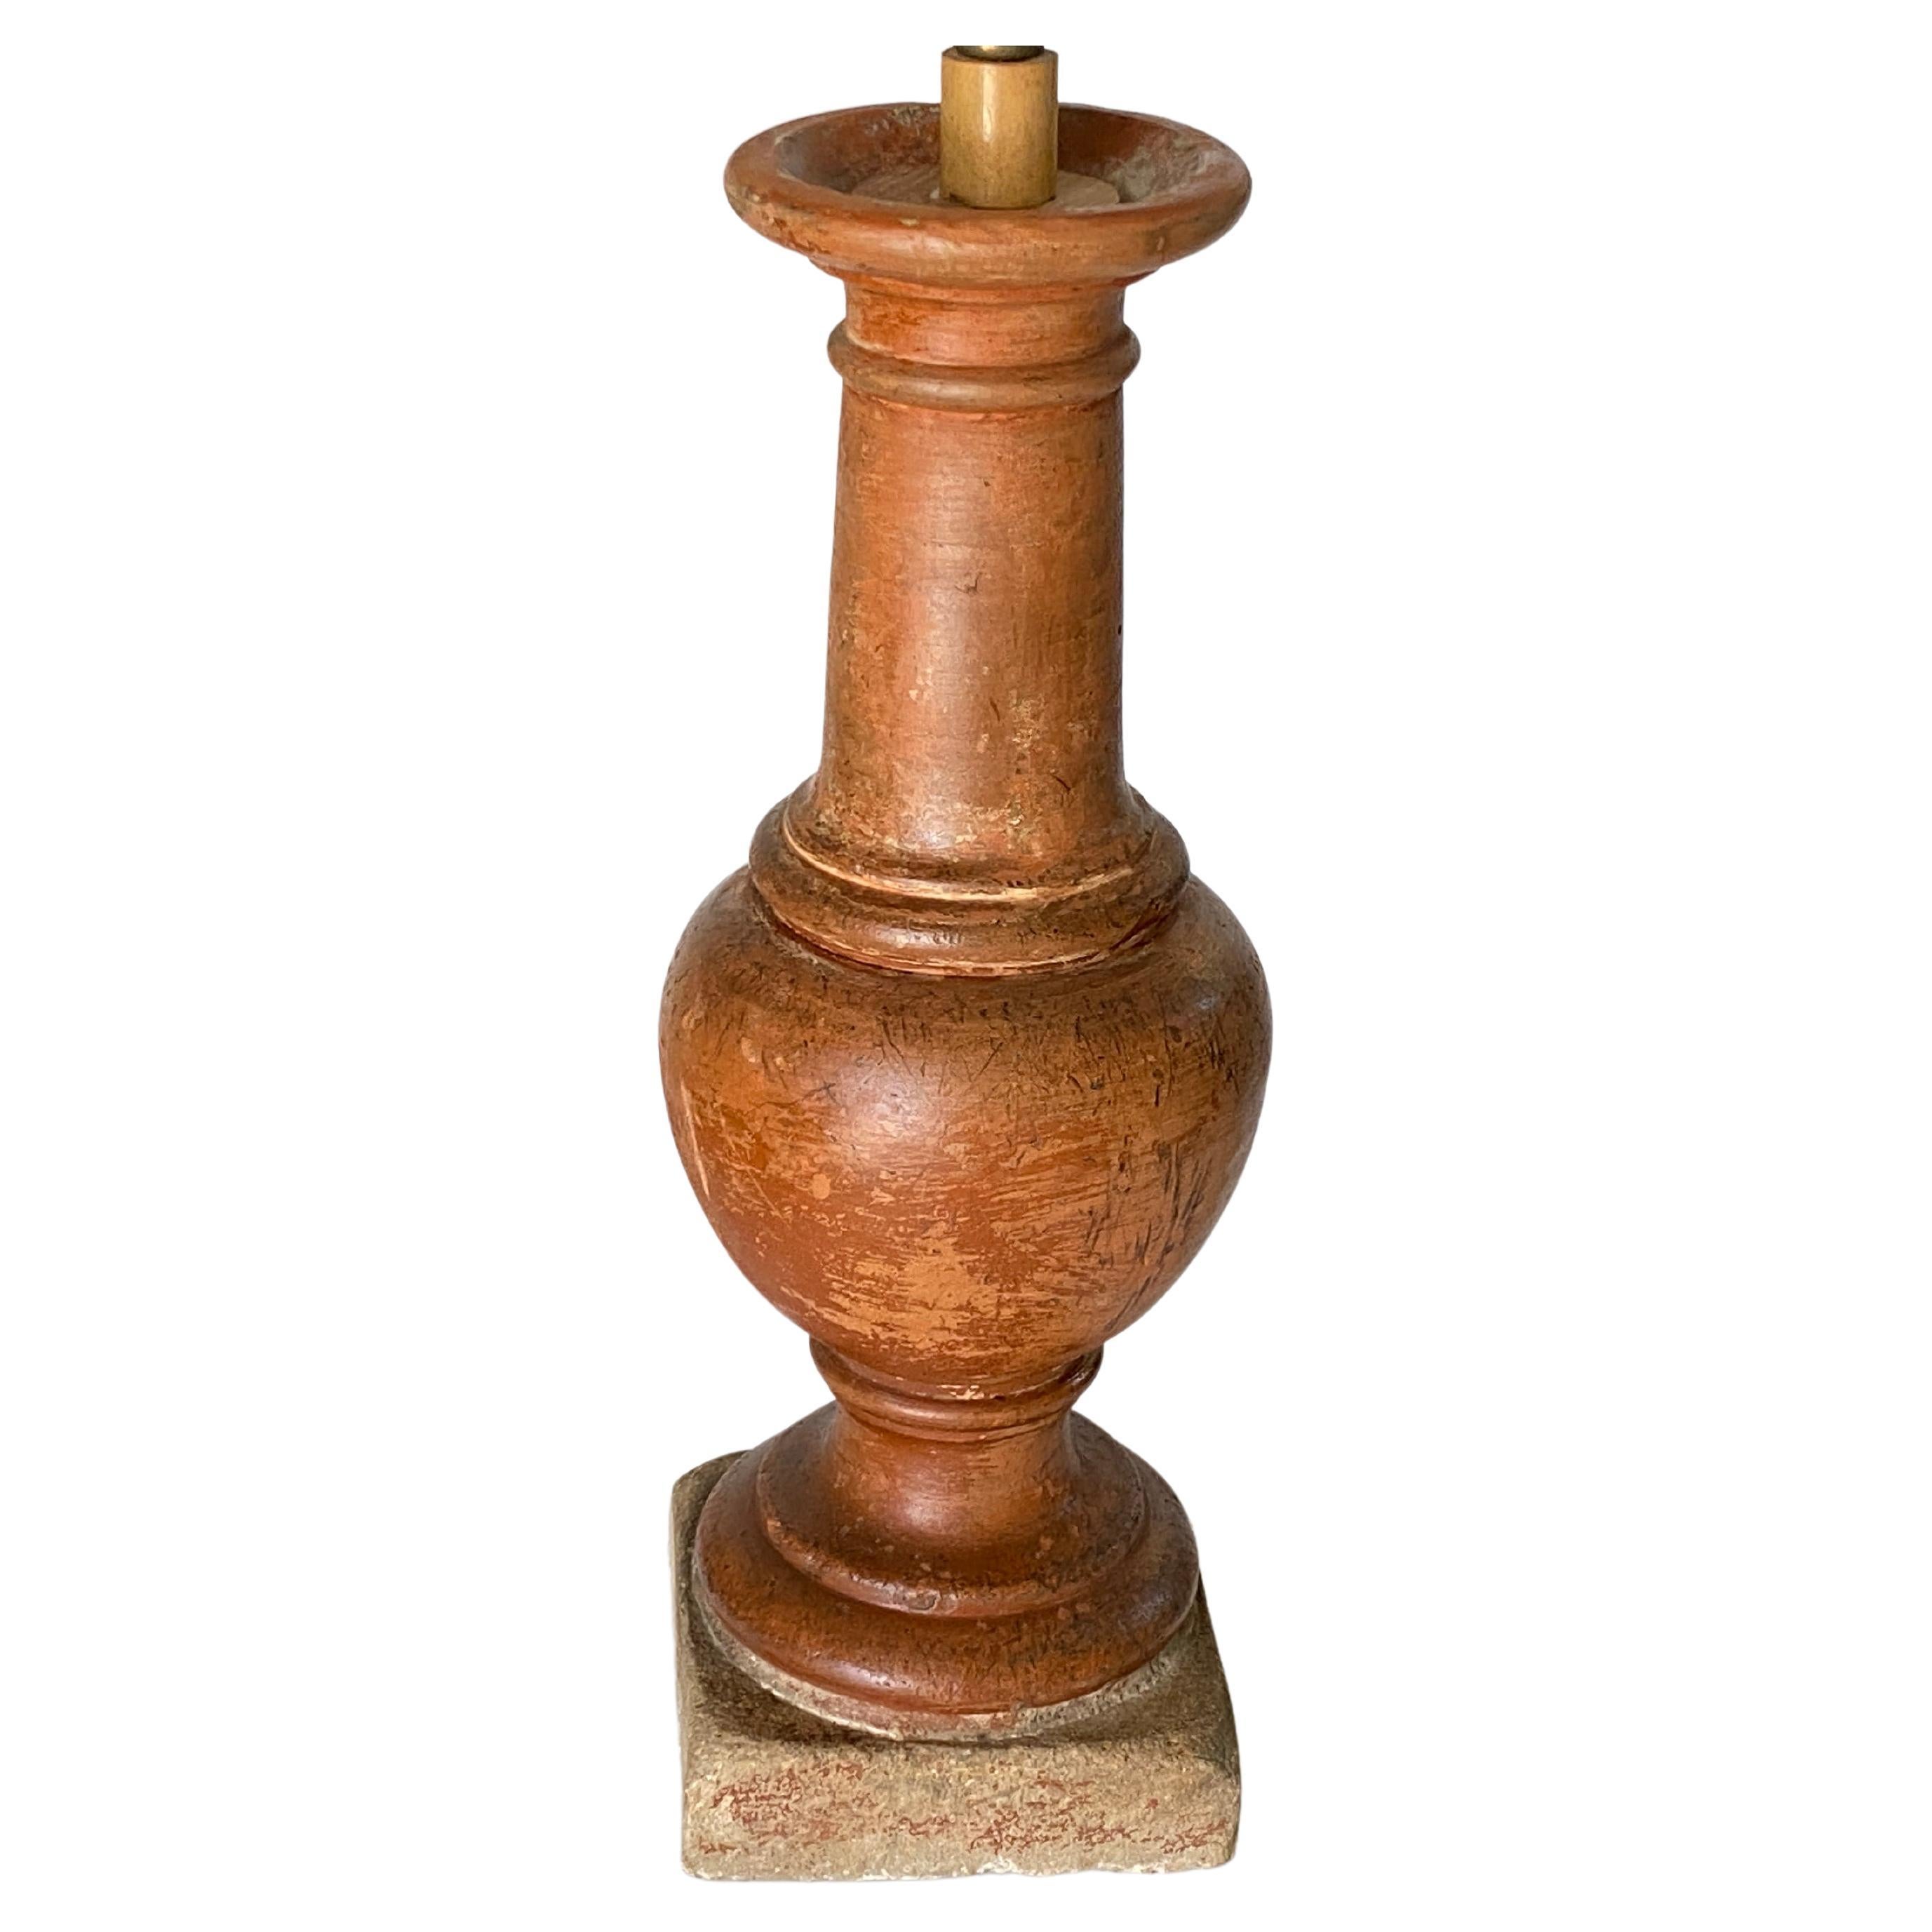 Tall French Neoclassical Terracotta Baluster Lamp, Brown Color, 19th Century In Good Condition For Sale In Auribeau sur Siagne, FR